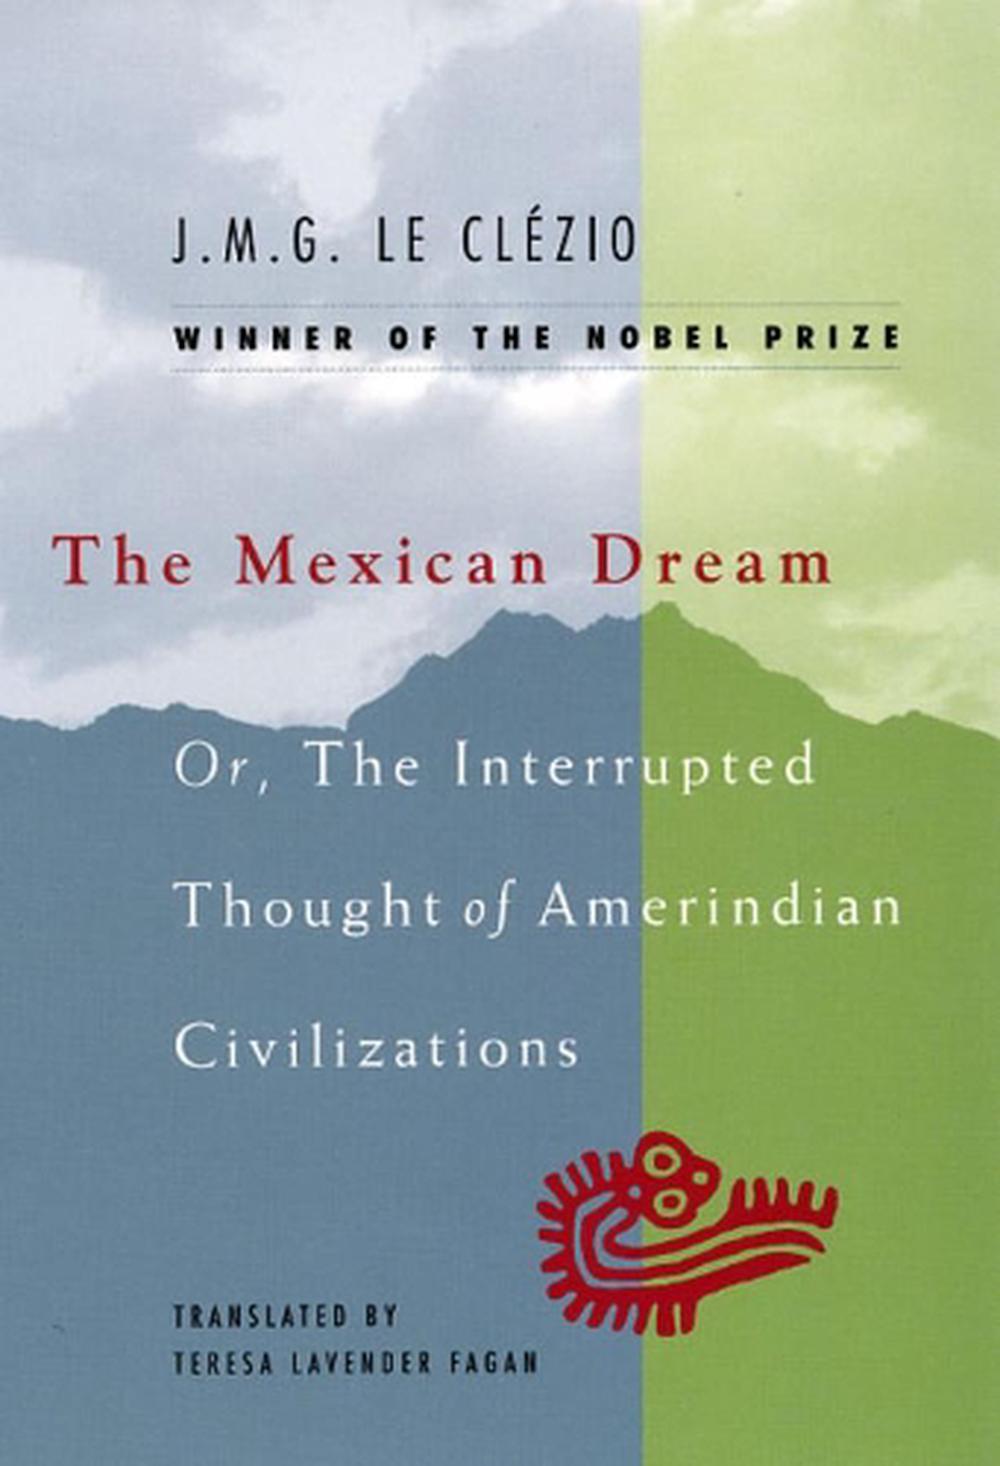 The Mexican Dream, or The Interrupted Thought of Amerindian C... by J.M.G. Le Clézio